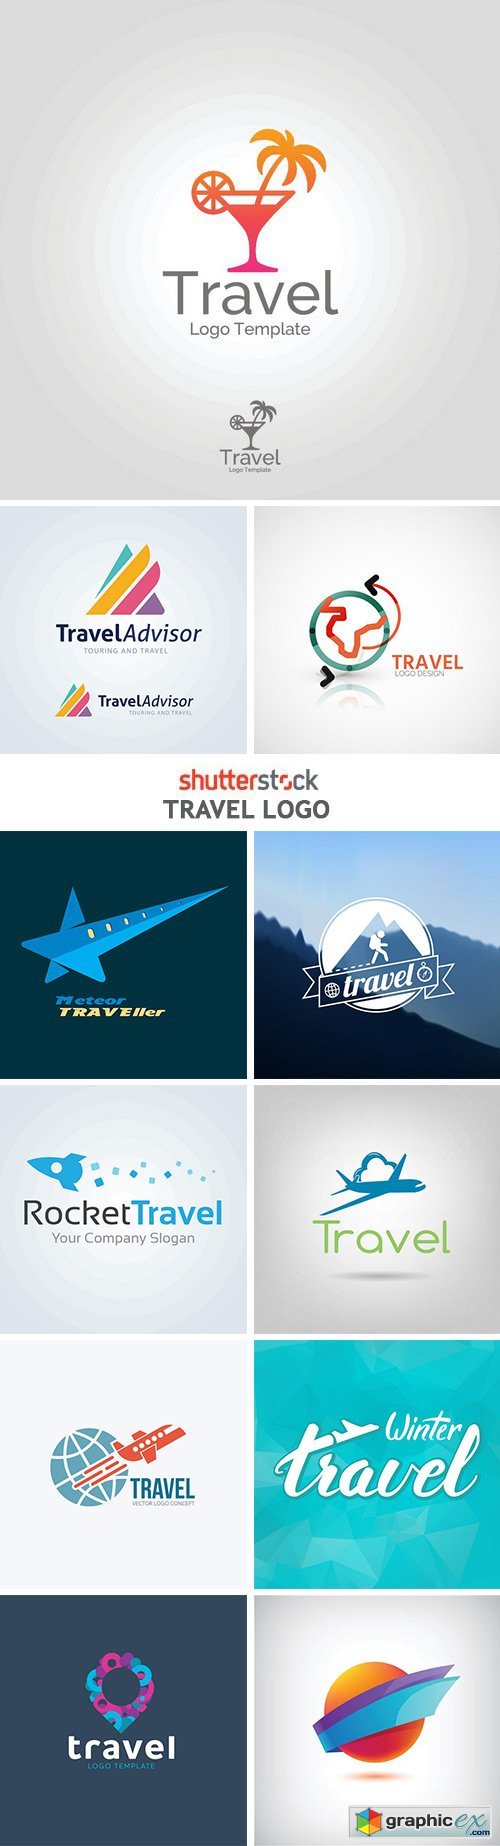 Travel Logo - 25xEPS » Free Download Vector Stock Image Photoshop Icon